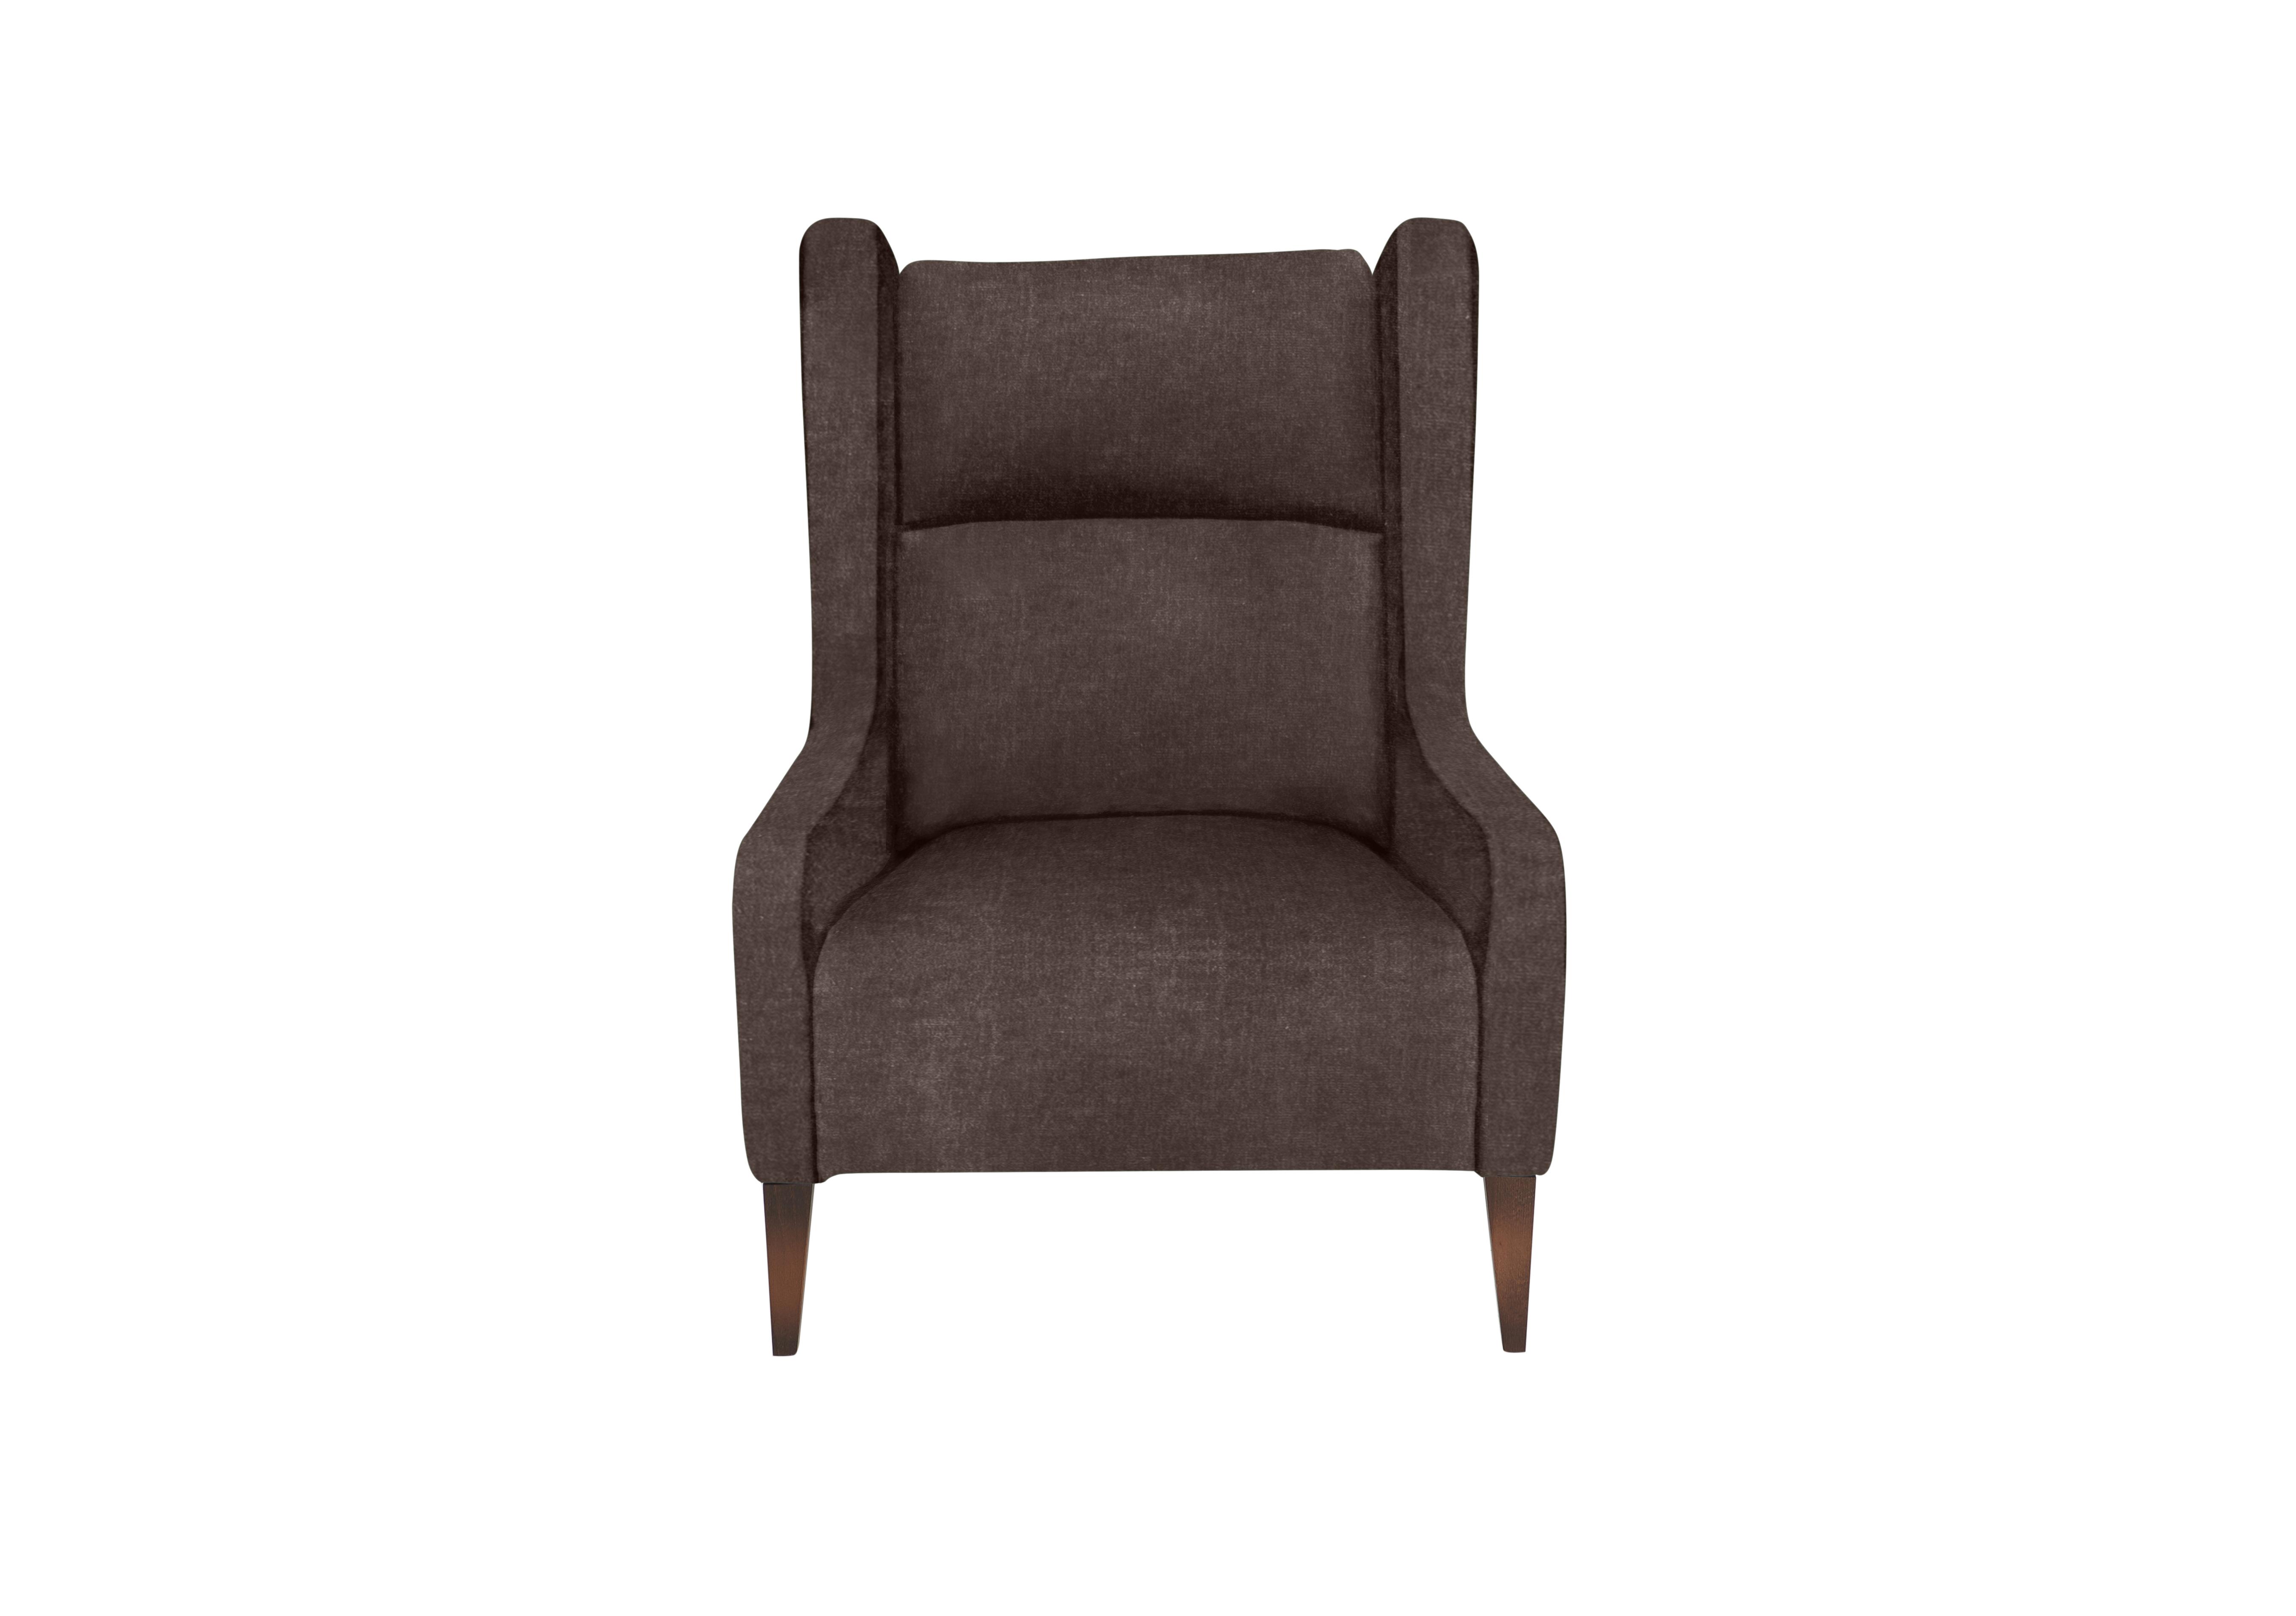 Boutique Palace Fabric Accent Chair in Oasis Mocha on Furniture Village